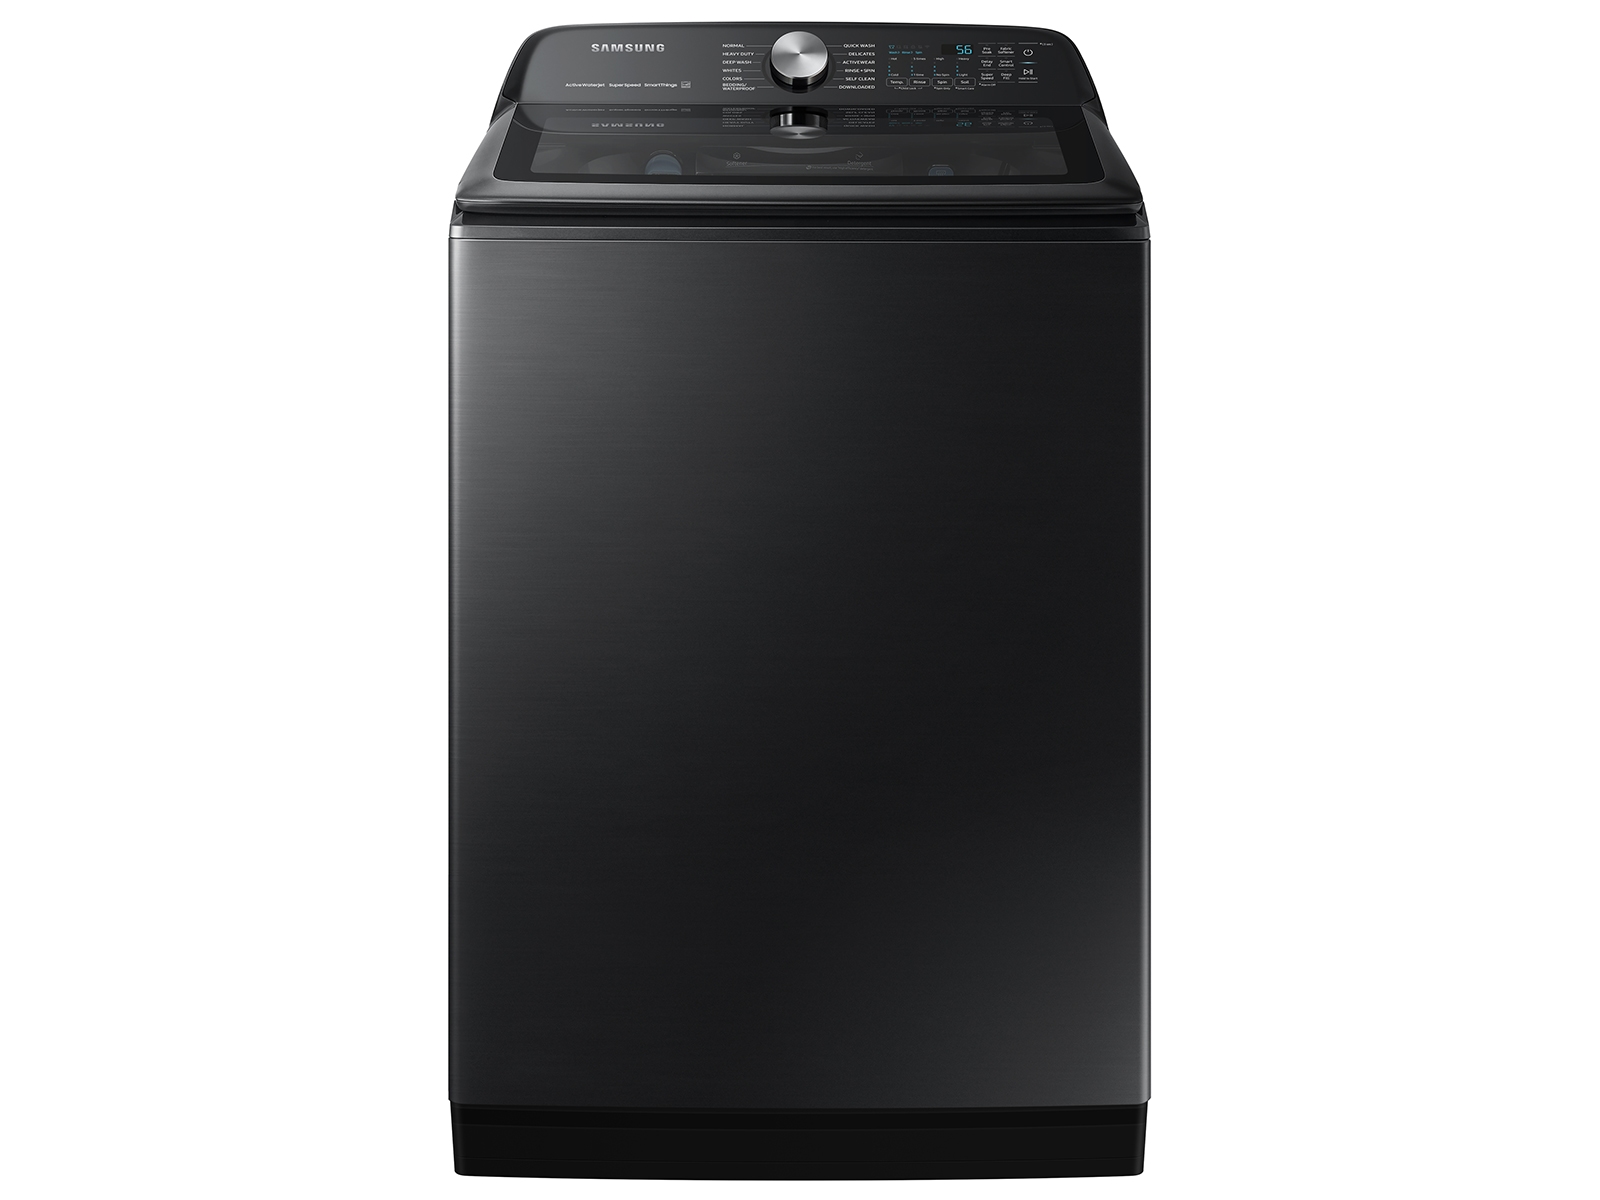 Photos - Washing Machine Samsung 5.2 cu. ft. Large Capacity Smart Top Load Washer with Super Speed 